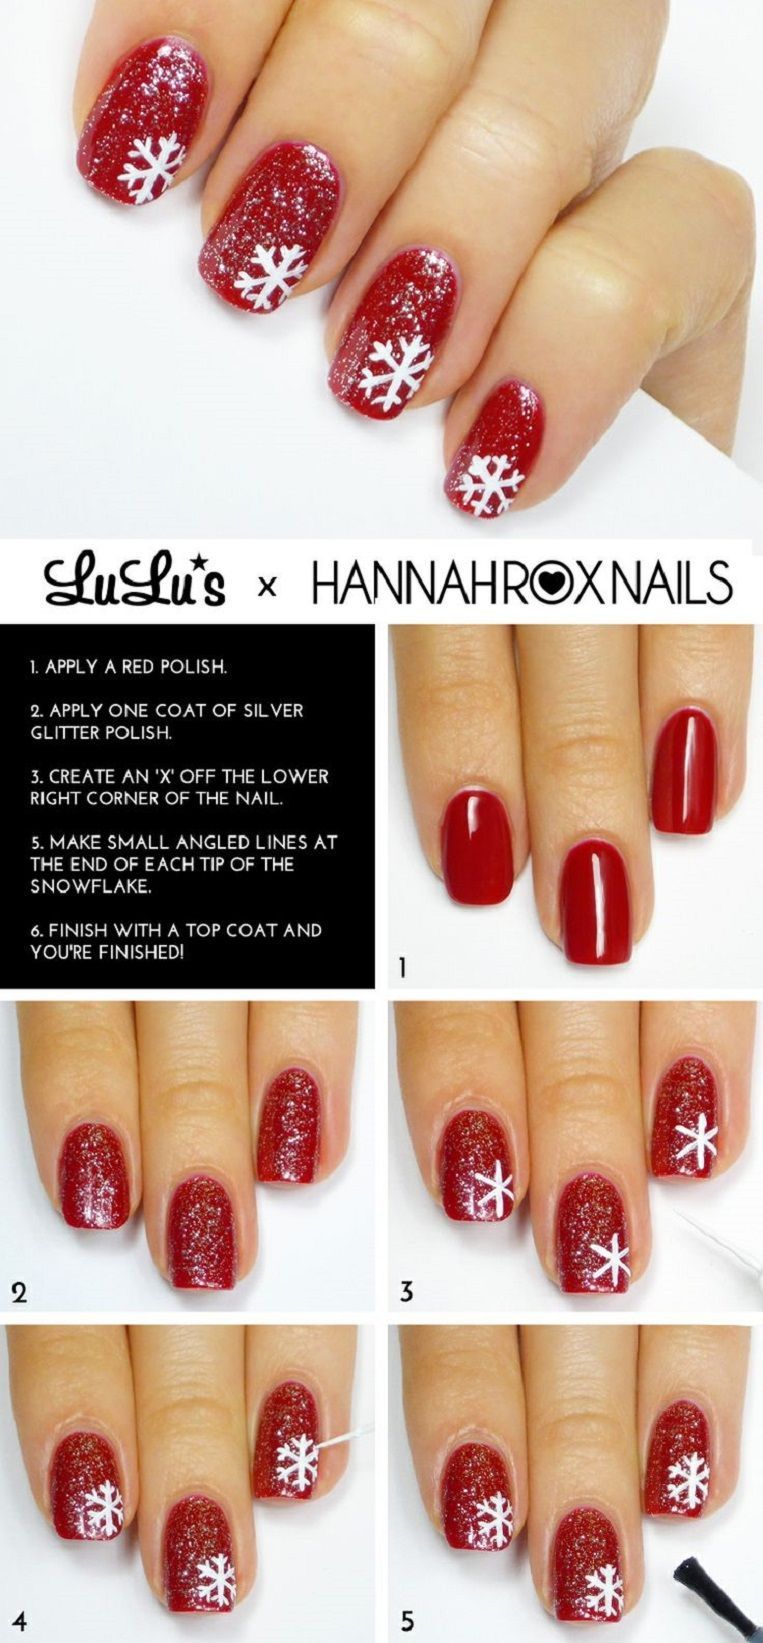 super cute snow flake nails!! love the red and white cant wait to start trying out Christmas decorations on my nails and toe